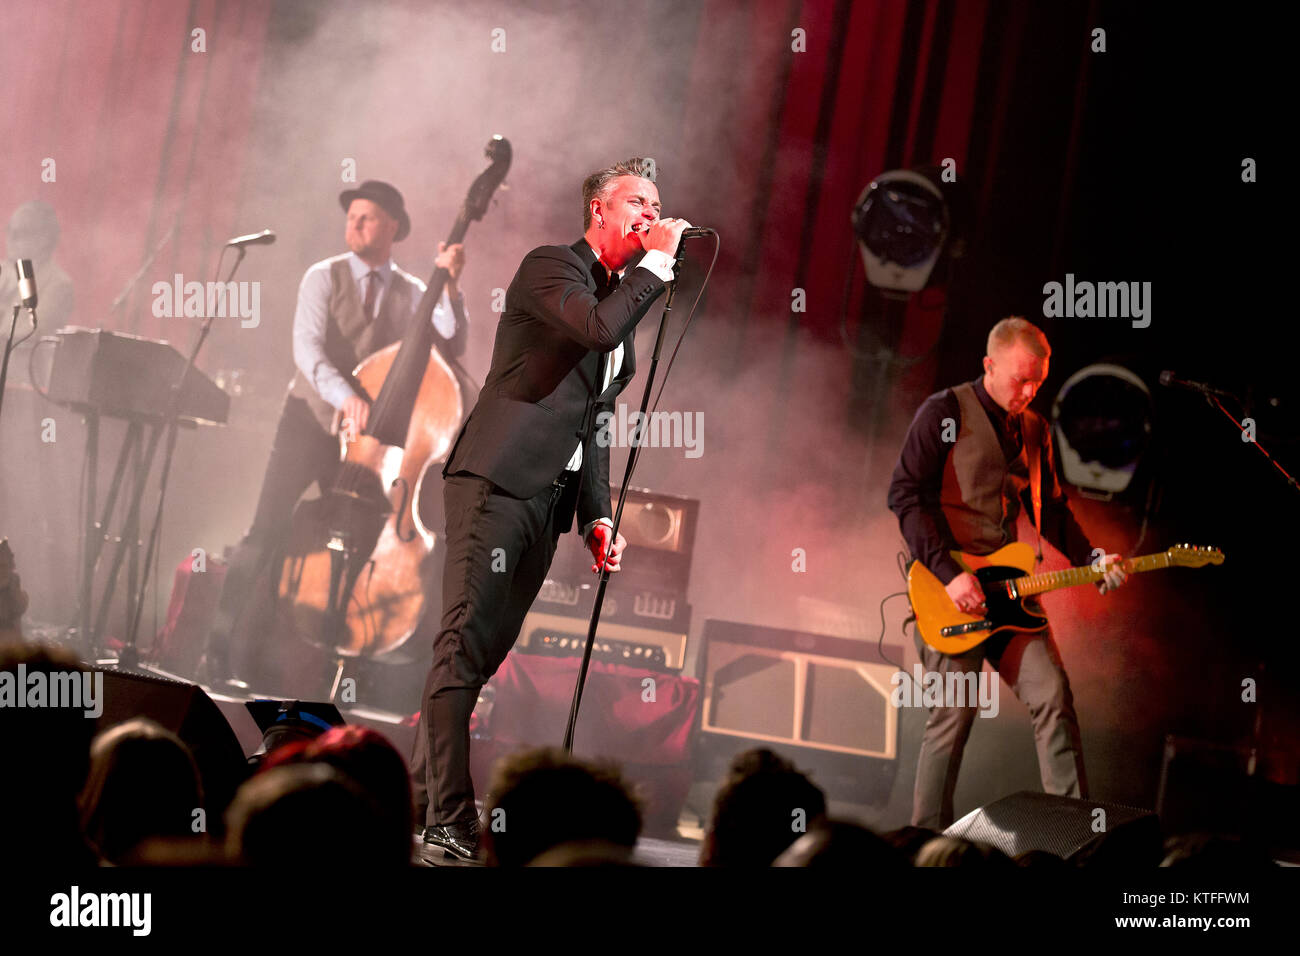 The Norwegian rock band Kaizers Orchestra performs a live concert at Den Norske Opera in Oslo. Here vocalist, songwriter and musician Janove Ottesen is seen live on stage. Norway, 27/01 2013. Stock Photo